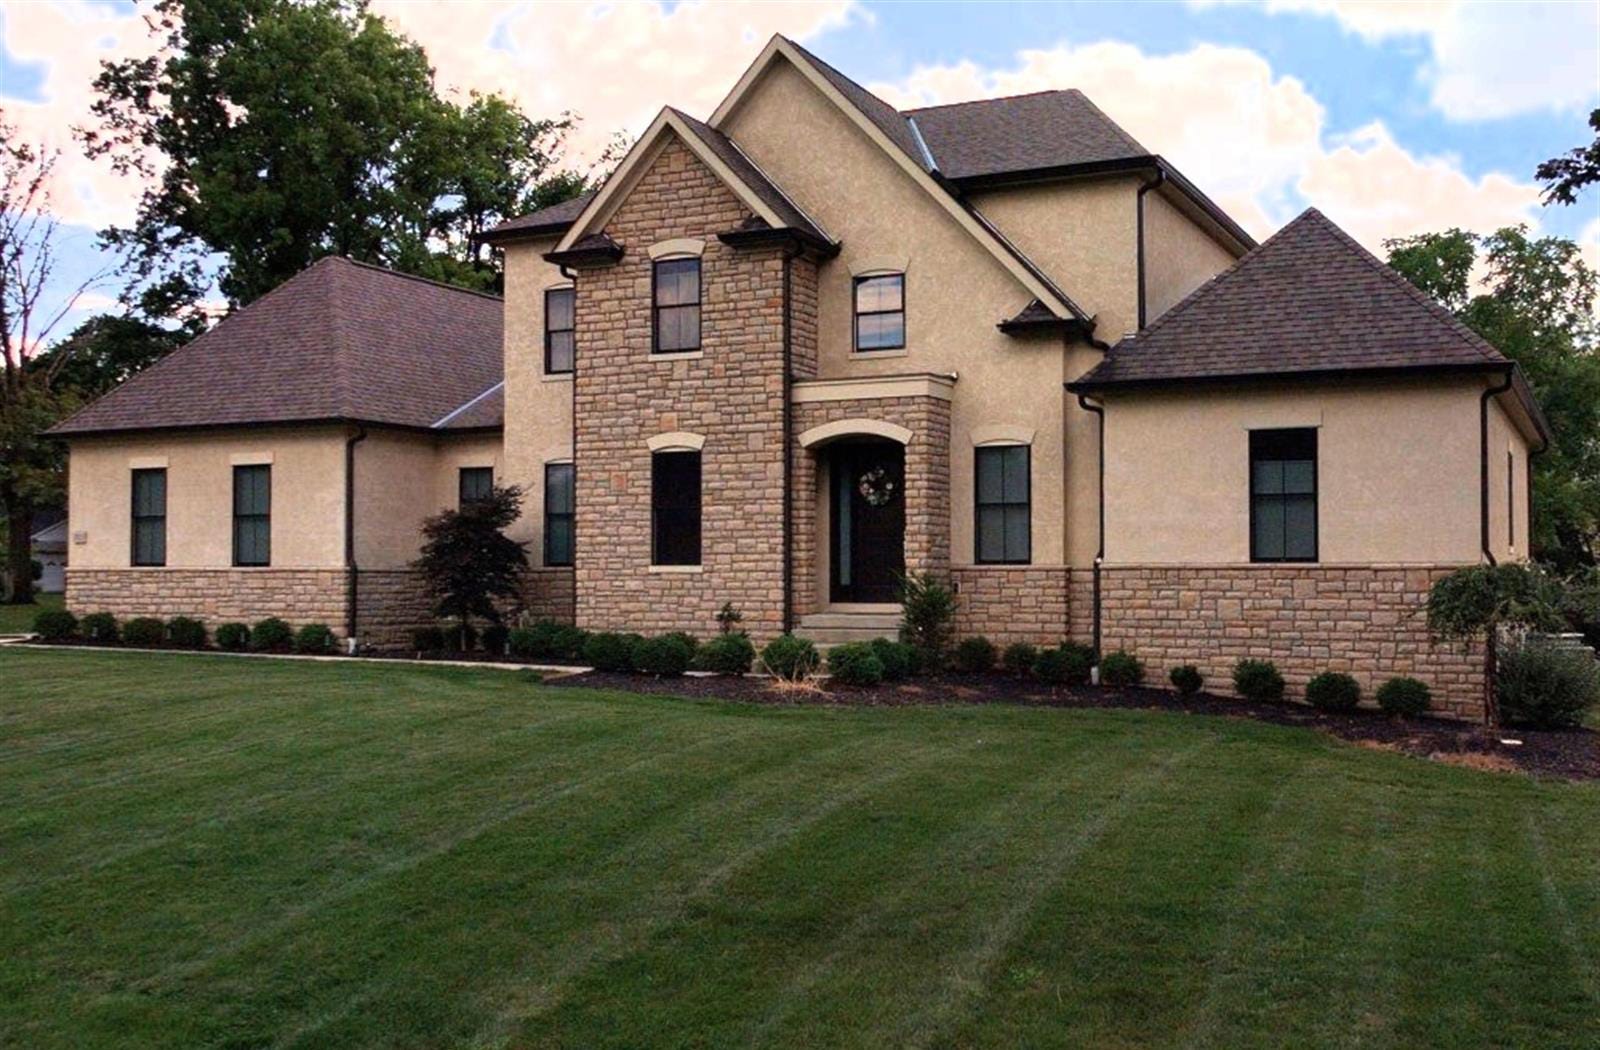 This home at 3825 Waldo Place in Upper Arlington recently sold for $1.5 million.